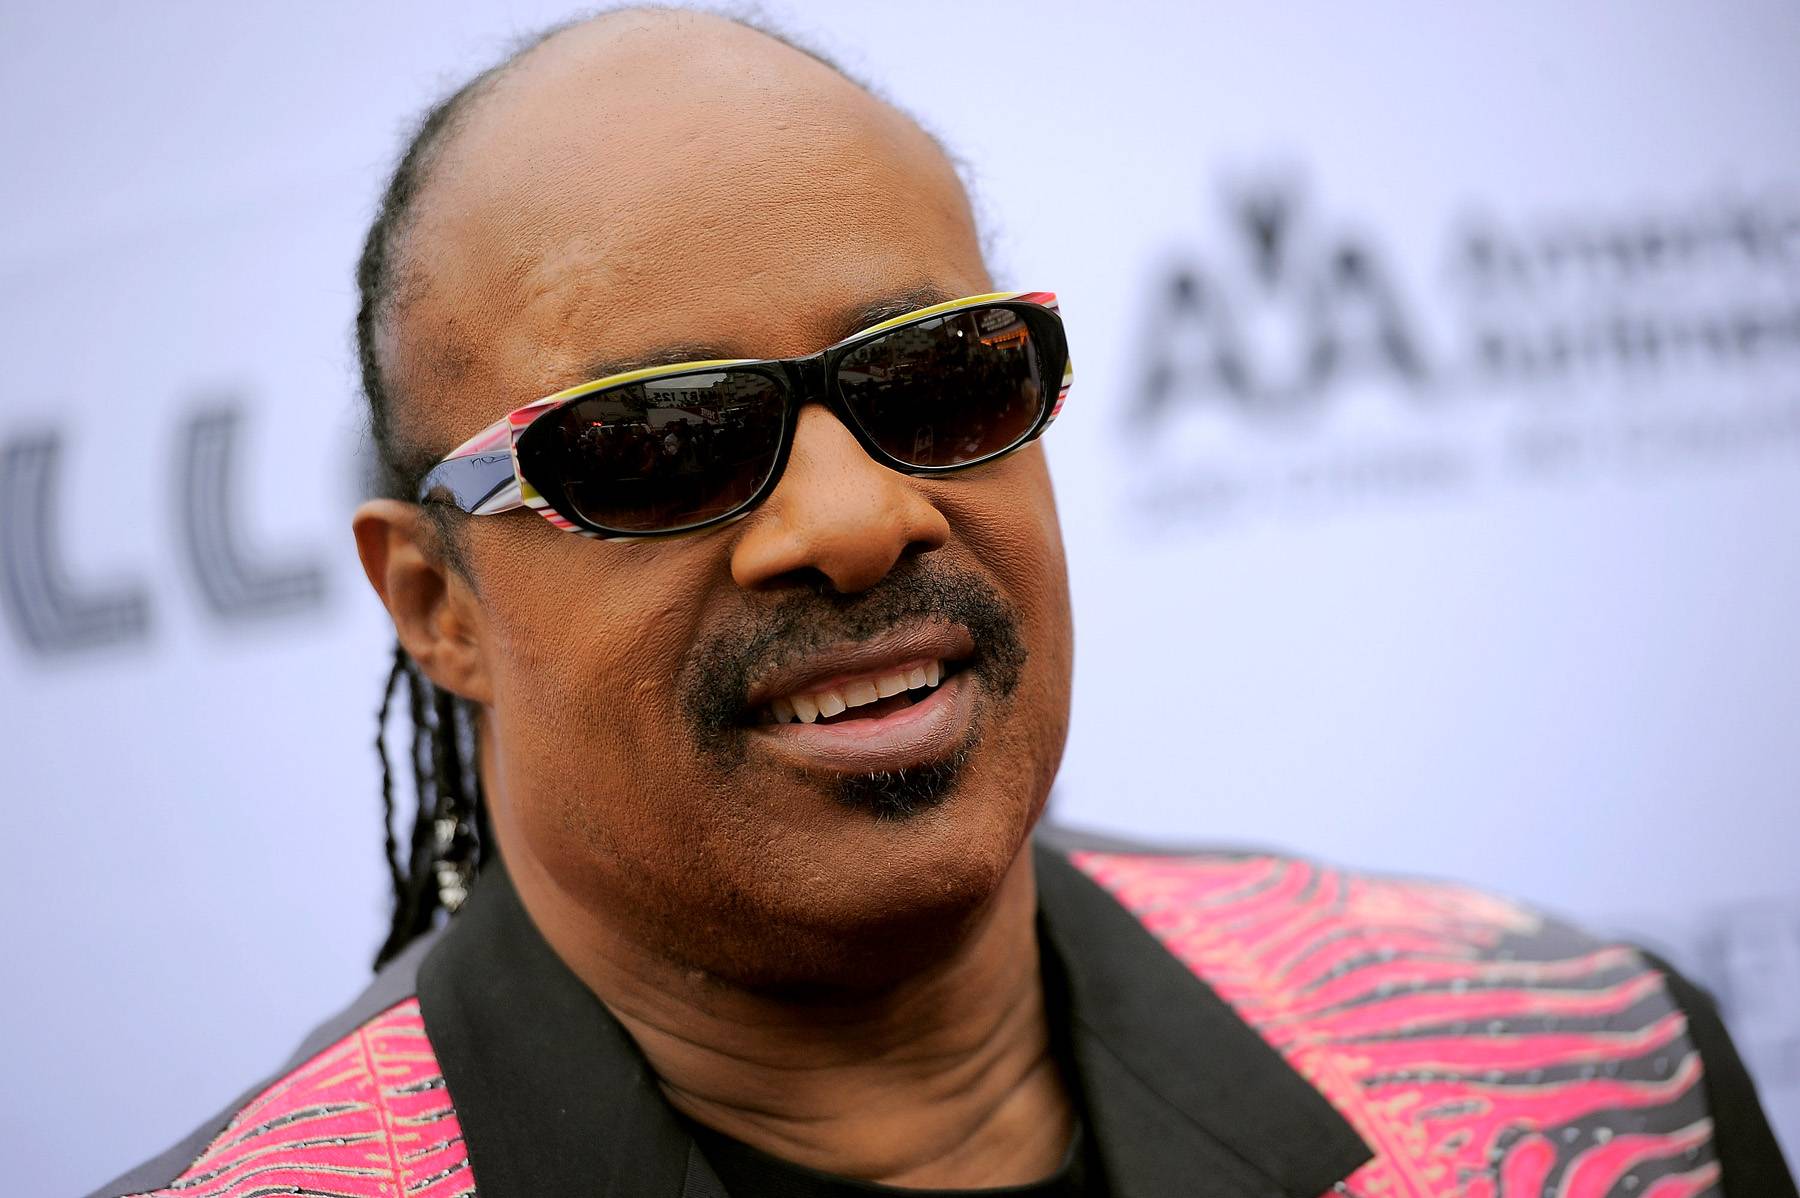 Stevie Wonder - Stevie Wonder’s inspiring jams like, “Living in the City,” “Village Ghetto Land,” and “Heaven Help Us All,” painted vivid pictures of the struggle. The dose of harsh reality is certain to get demonstrators chanting for change.&nbsp;(Photo: Jemal Countess/Getty Images)